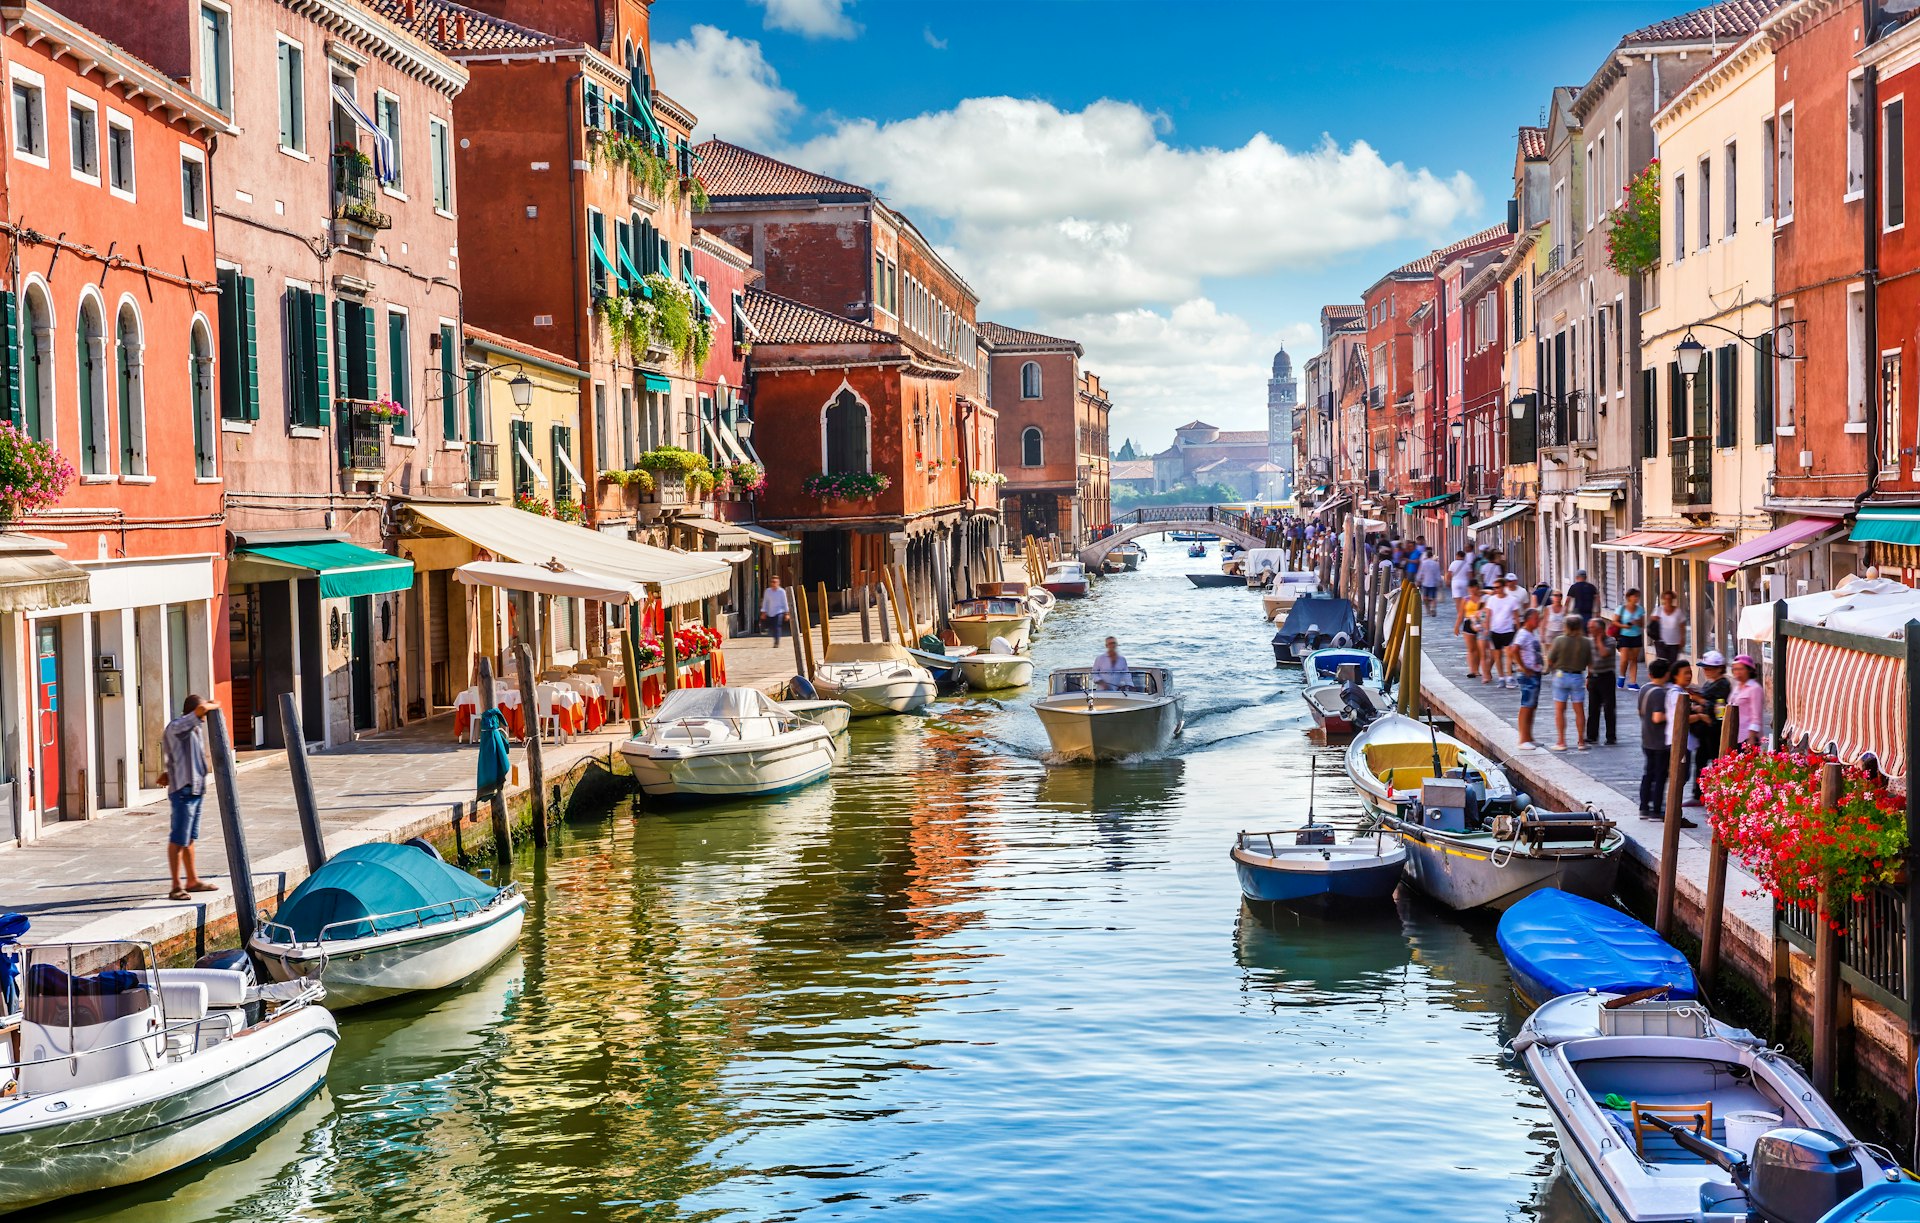 Visitors and boats in the canals of Italy's Murano island